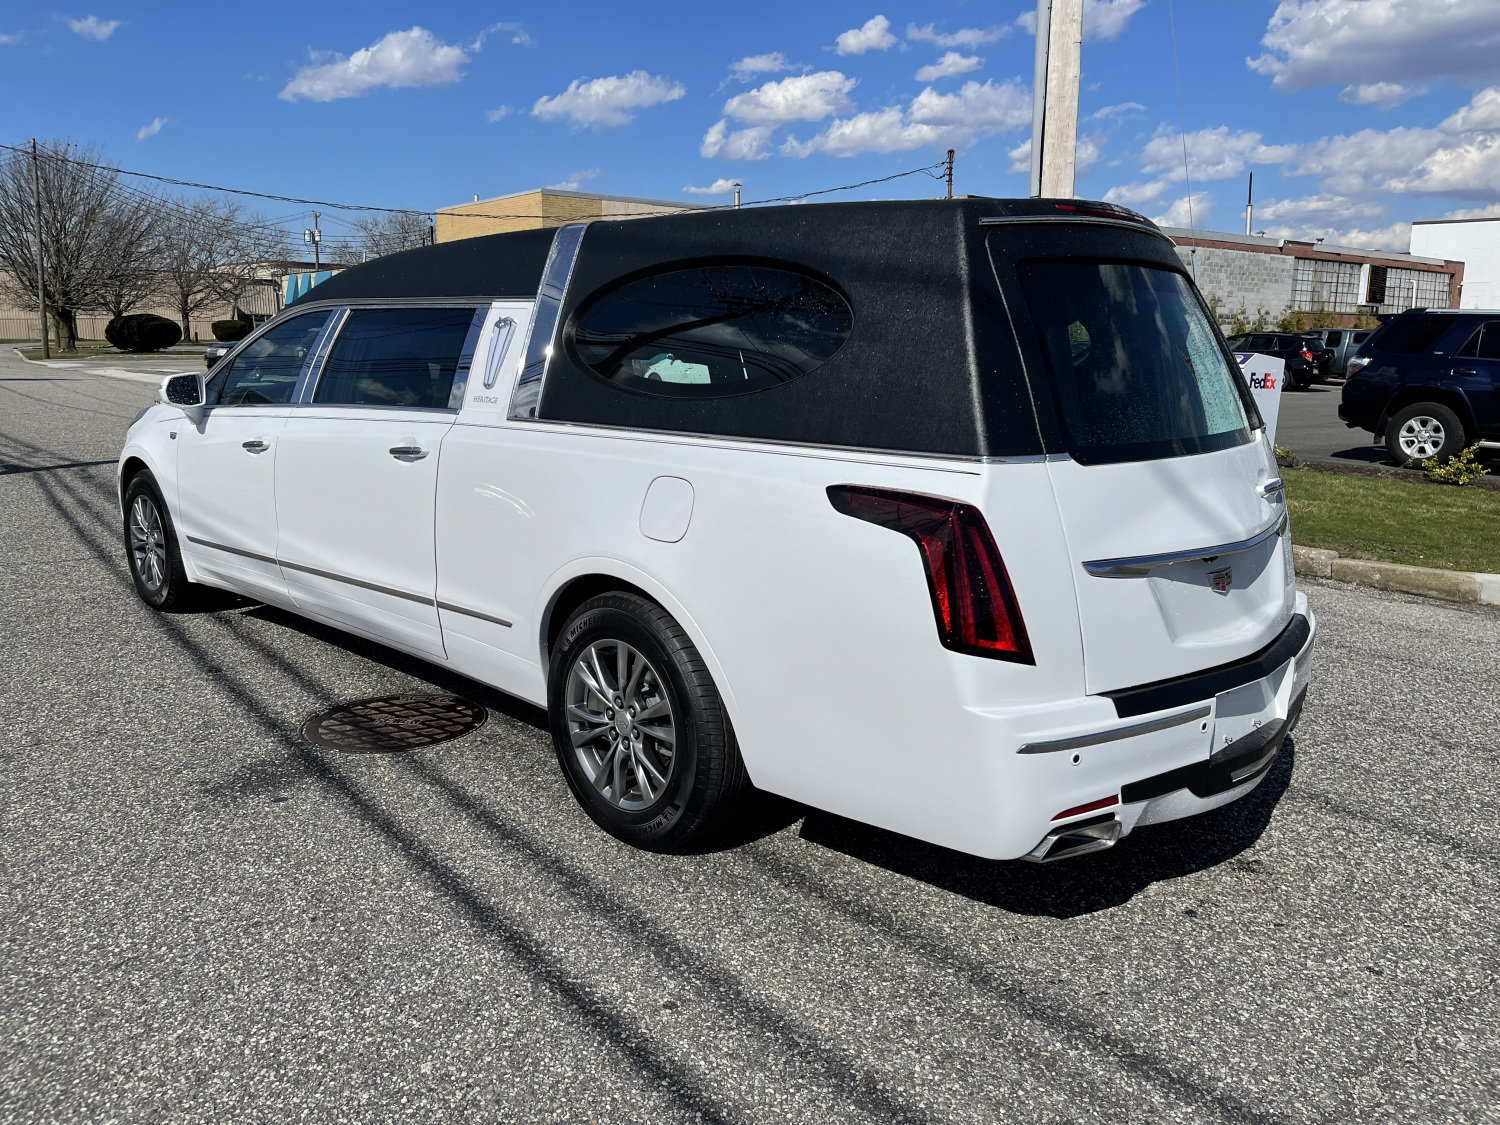 2024 CADILLAC FEDERAL HERITAGE FUNERAL HEARSE Specialty Hearse